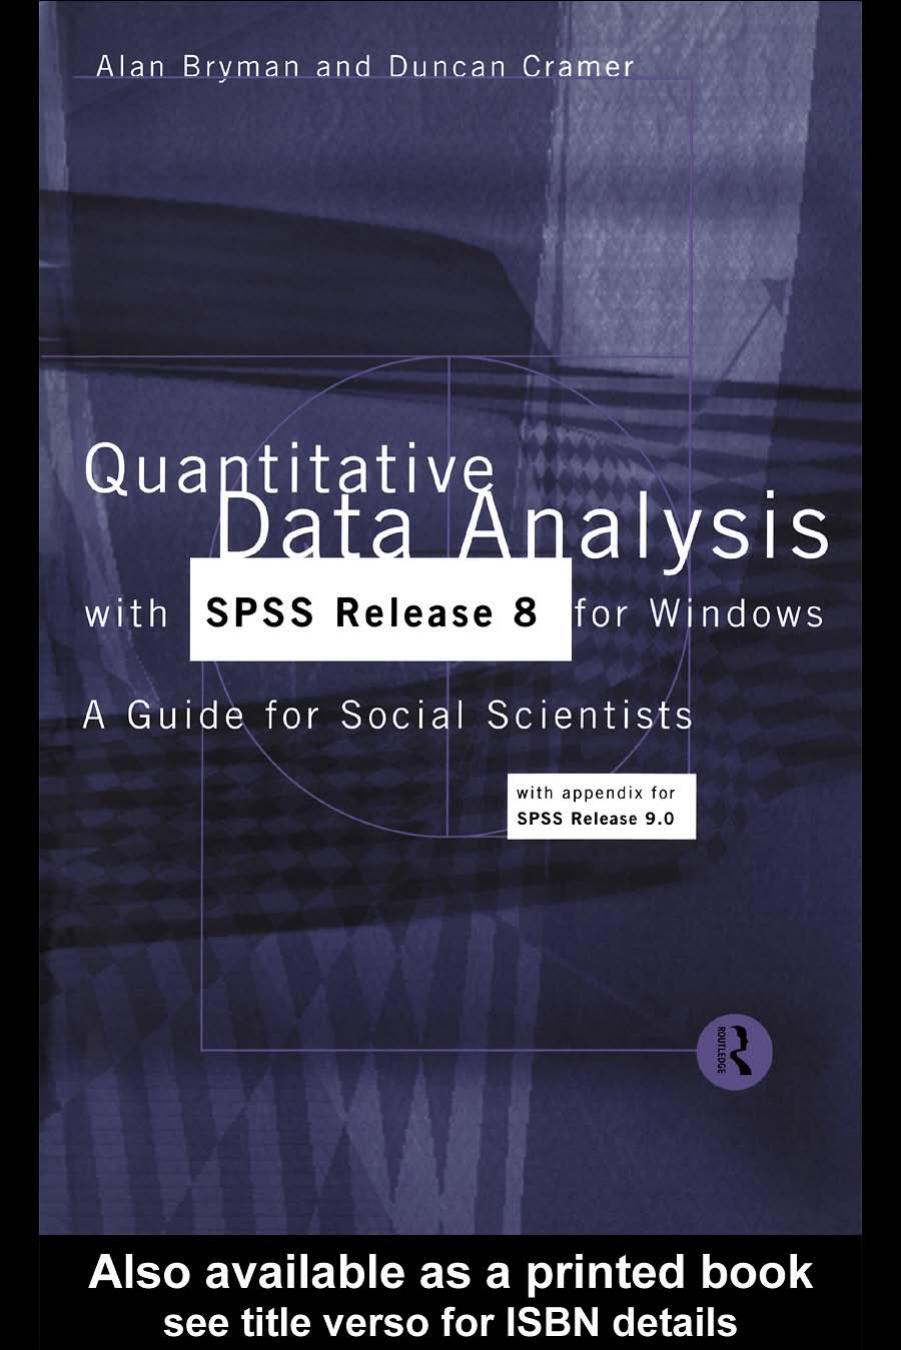 Quantitative Data Analysis with SPSS Release 8 for Windows: A Guide for Social Scientists